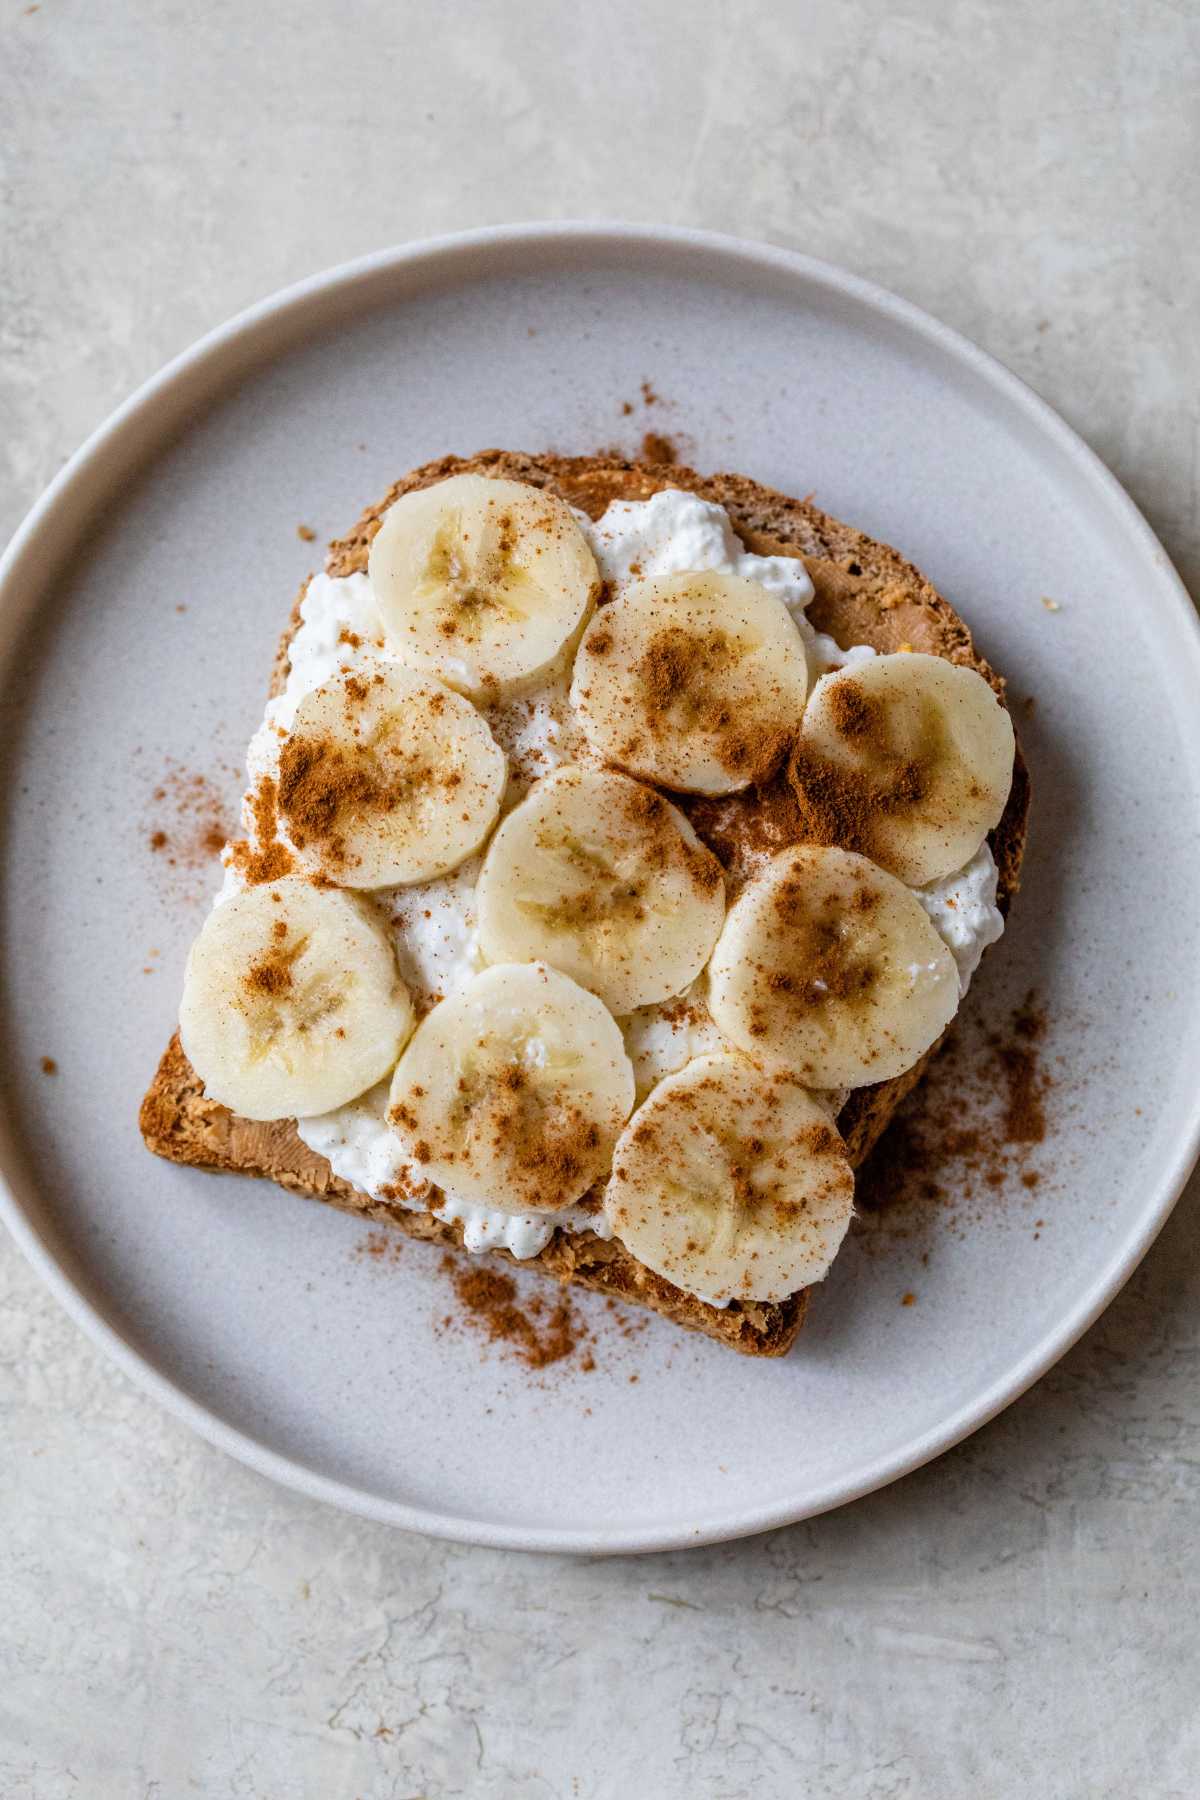 Toast topped with peanut butter, cottage cheese and sliced banana.